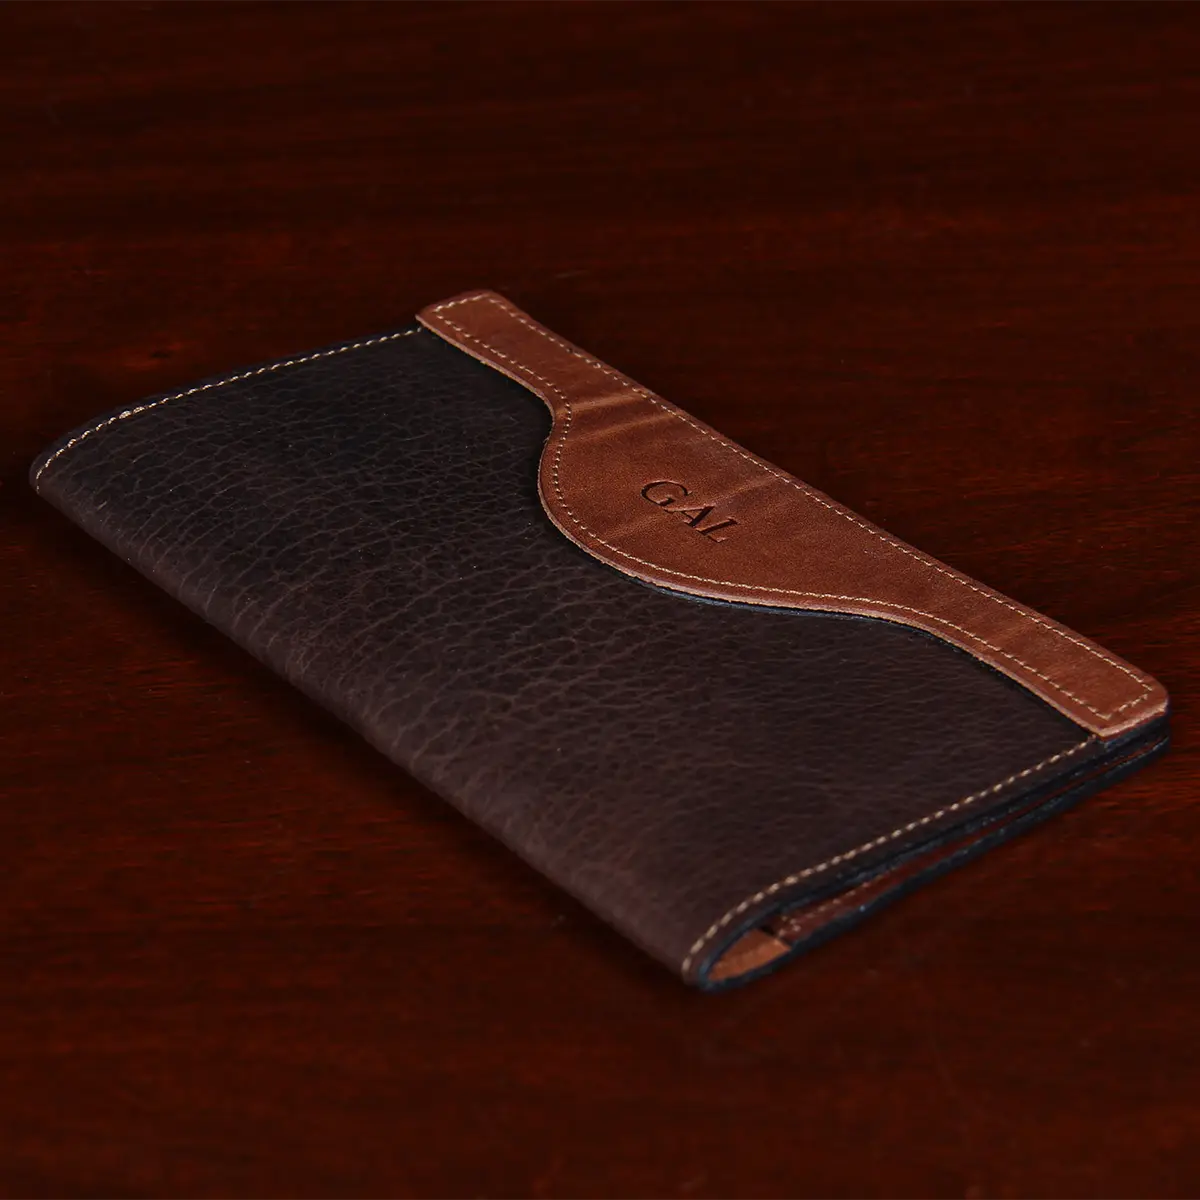 two-toned leather checkbook cover laying on wood table